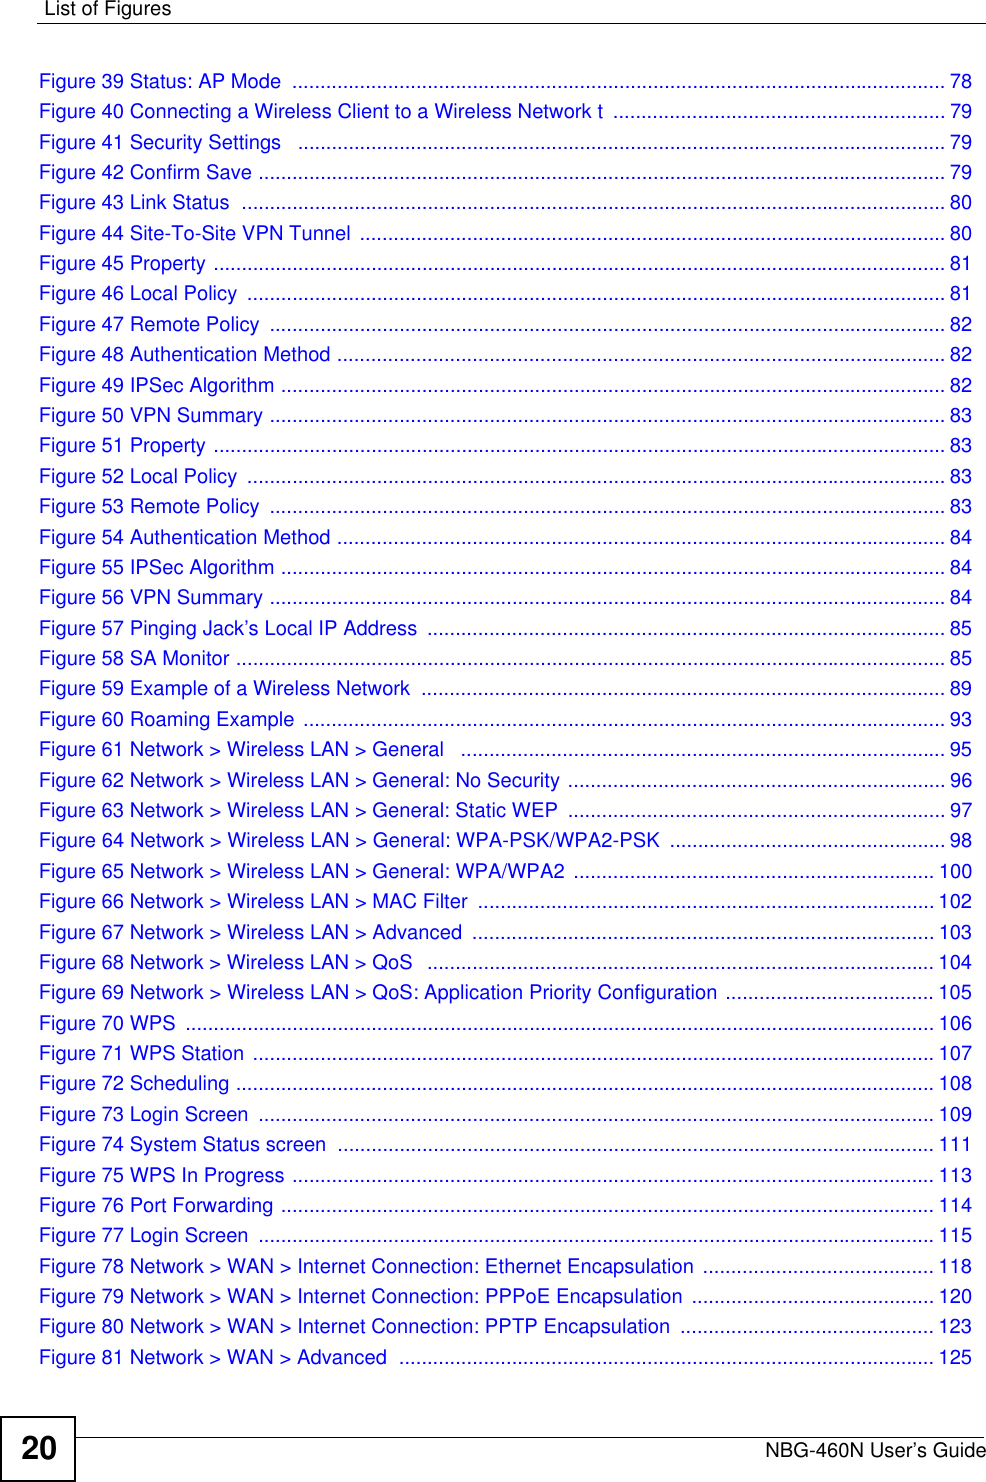 List of FiguresNBG-460N User’s Guide20Figure 39 Status: AP Mode  .................................................................................................................... 78Figure 40 Connecting a Wireless Client to a Wireless Network t  ........................................................... 79Figure 41 Security Settings   ................................................................................................................... 79Figure 42 Confirm Save .......................................................................................................................... 79Figure 43 Link Status  ............................................................................................................................. 80Figure 44 Site-To-Site VPN Tunnel  ........................................................................................................ 80Figure 45 Property .................................................................................................................................. 81Figure 46 Local Policy  ............................................................................................................................ 81Figure 47 Remote Policy  ........................................................................................................................ 82Figure 48 Authentication Method ............................................................................................................ 82Figure 49 IPSec Algorithm ...................................................................................................................... 82Figure 50 VPN Summary ........................................................................................................................ 83Figure 51 Property .................................................................................................................................. 83Figure 52 Local Policy  ............................................................................................................................ 83Figure 53 Remote Policy  ........................................................................................................................ 83Figure 54 Authentication Method ............................................................................................................ 84Figure 55 IPSec Algorithm ...................................................................................................................... 84Figure 56 VPN Summary ........................................................................................................................ 84Figure 57 Pinging Jack’s Local IP Address  ............................................................................................ 85Figure 58 SA Monitor .............................................................................................................................. 85Figure 59 Example of a Wireless Network  ............................................................................................. 89Figure 60 Roaming Example .................................................................................................................. 93Figure 61 Network &gt; Wireless LAN &gt; General   ...................................................................................... 95Figure 62 Network &gt; Wireless LAN &gt; General: No Security ................................................................... 96Figure 63 Network &gt; Wireless LAN &gt; General: Static WEP  ................................................................... 97Figure 64 Network &gt; Wireless LAN &gt; General: WPA-PSK/WPA2-PSK  ................................................. 98Figure 65 Network &gt; Wireless LAN &gt; General: WPA/WPA2  ................................................................ 100Figure 66 Network &gt; Wireless LAN &gt; MAC Filter  ................................................................................. 102Figure 67 Network &gt; Wireless LAN &gt; Advanced  .................................................................................. 103Figure 68 Network &gt; Wireless LAN &gt; QoS  .......................................................................................... 104Figure 69 Network &gt; Wireless LAN &gt; QoS: Application Priority Configuration ..................................... 105Figure 70 WPS  ..................................................................................................................................... 106Figure 71 WPS Station ......................................................................................................................... 107Figure 72 Scheduling ............................................................................................................................ 108Figure 73 Login Screen  ........................................................................................................................ 109Figure 74 System Status screen  .......................................................................................................... 111Figure 75 WPS In Progress .................................................................................................................. 113Figure 76 Port Forwarding .................................................................................................................... 114Figure 77 Login Screen  ........................................................................................................................ 115Figure 78 Network &gt; WAN &gt; Internet Connection: Ethernet Encapsulation  ......................................... 118Figure 79 Network &gt; WAN &gt; Internet Connection: PPPoE Encapsulation  ........................................... 120Figure 80 Network &gt; WAN &gt; Internet Connection: PPTP Encapsulation  ............................................. 123Figure 81 Network &gt; WAN &gt; Advanced  ............................................................................................... 125